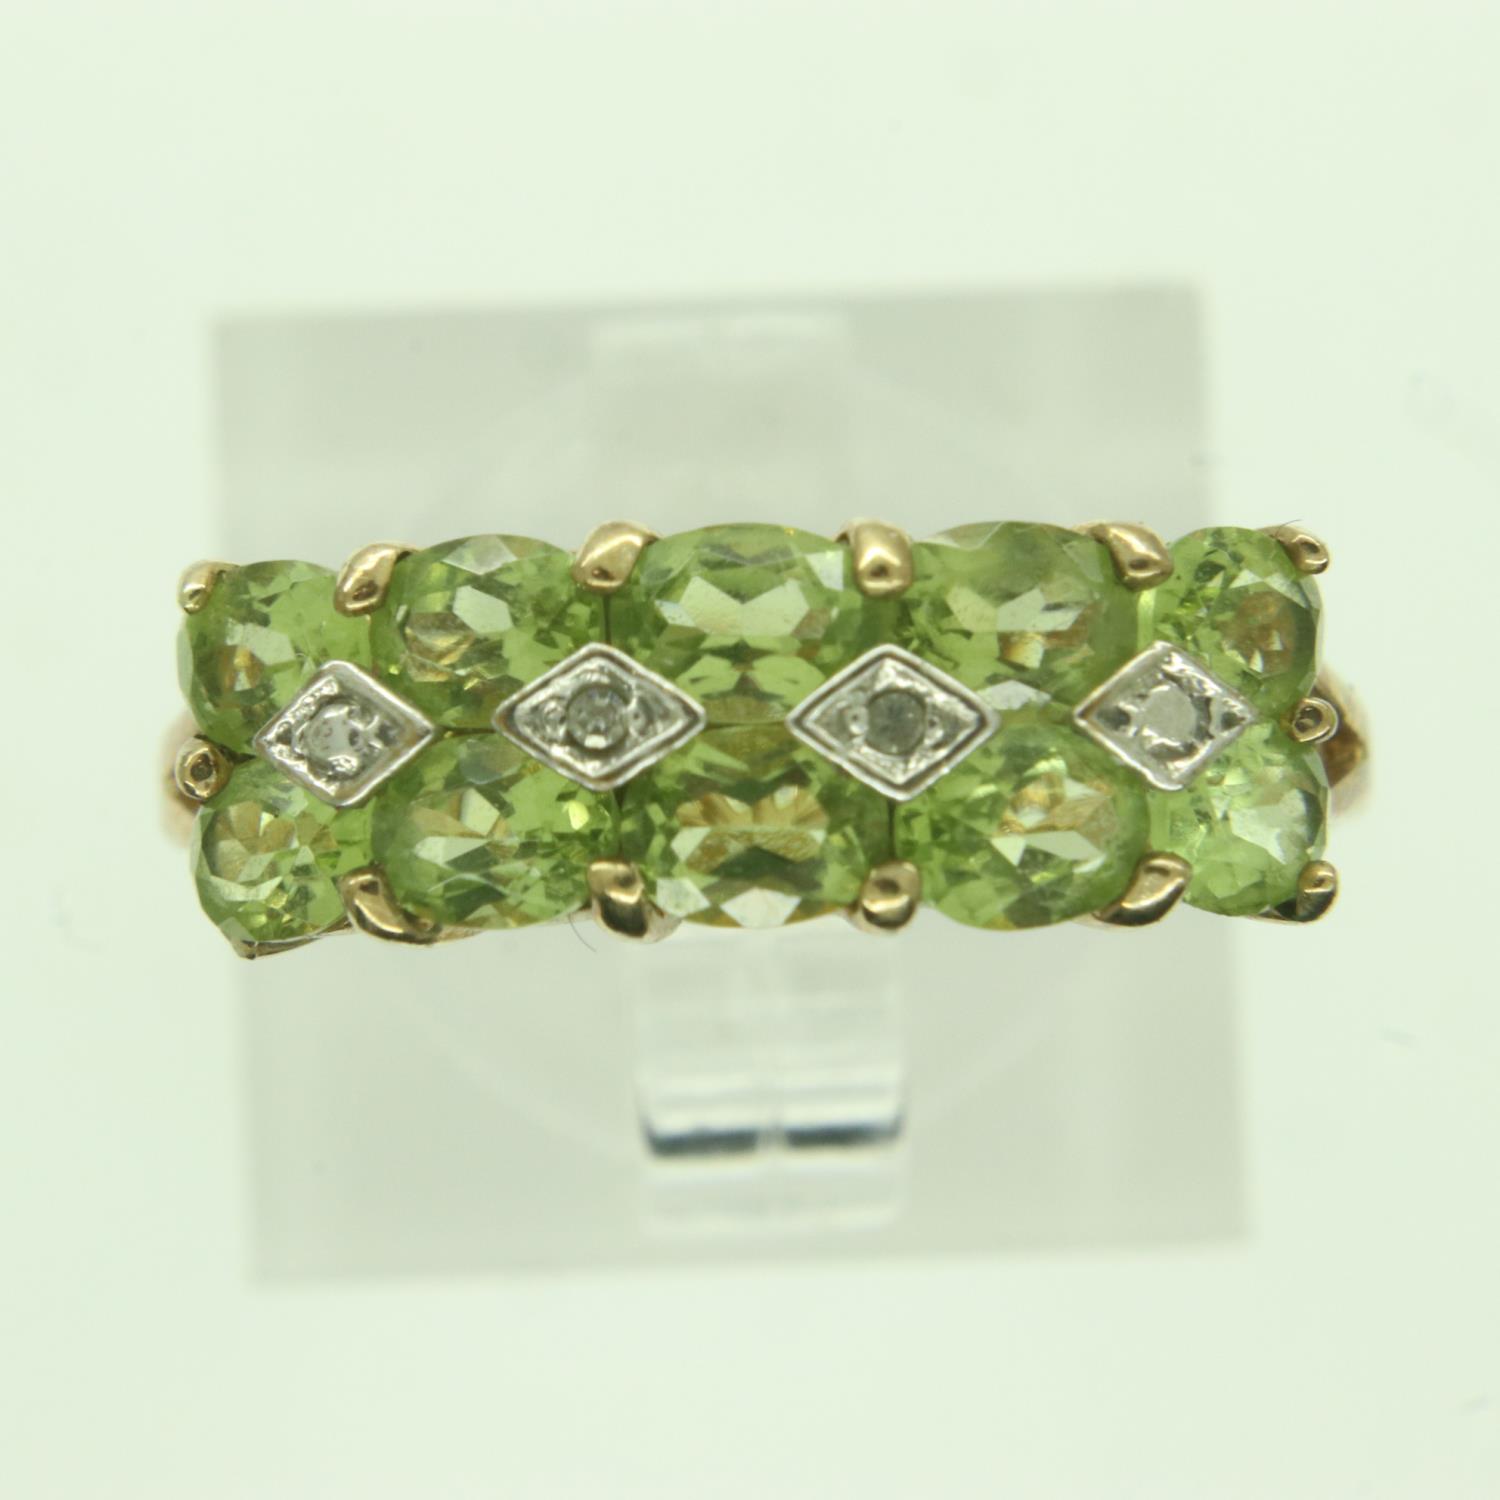 9ct gold diamond and peridot set ring, size P, 2.4g. UK P&P Group 0 (£6+VAT for the first lot and £